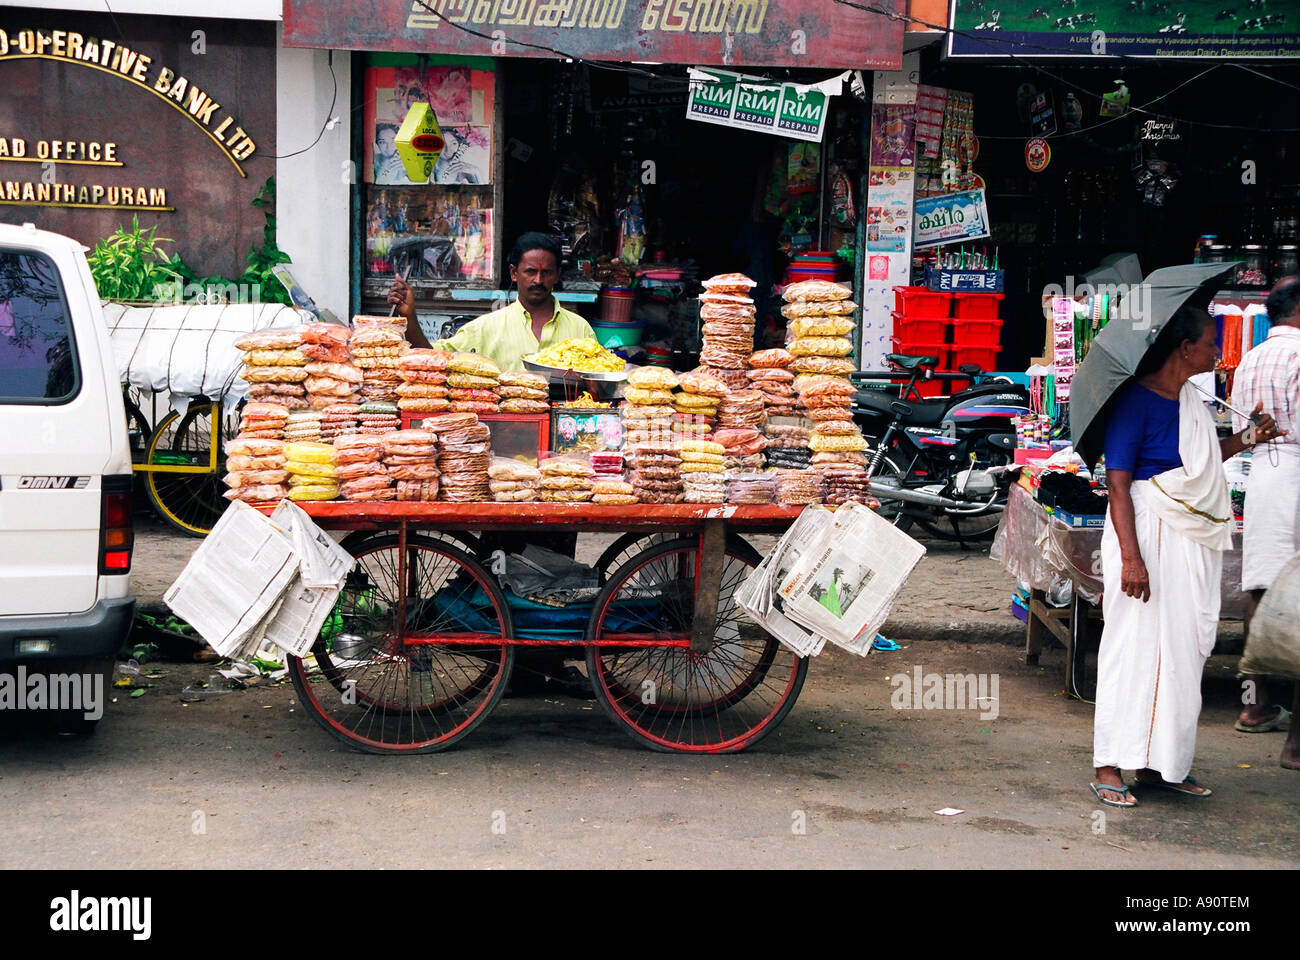 Indian roadside market stall selling snacks such as Bombay mix and Spicy Nuts in packets Stock Photo